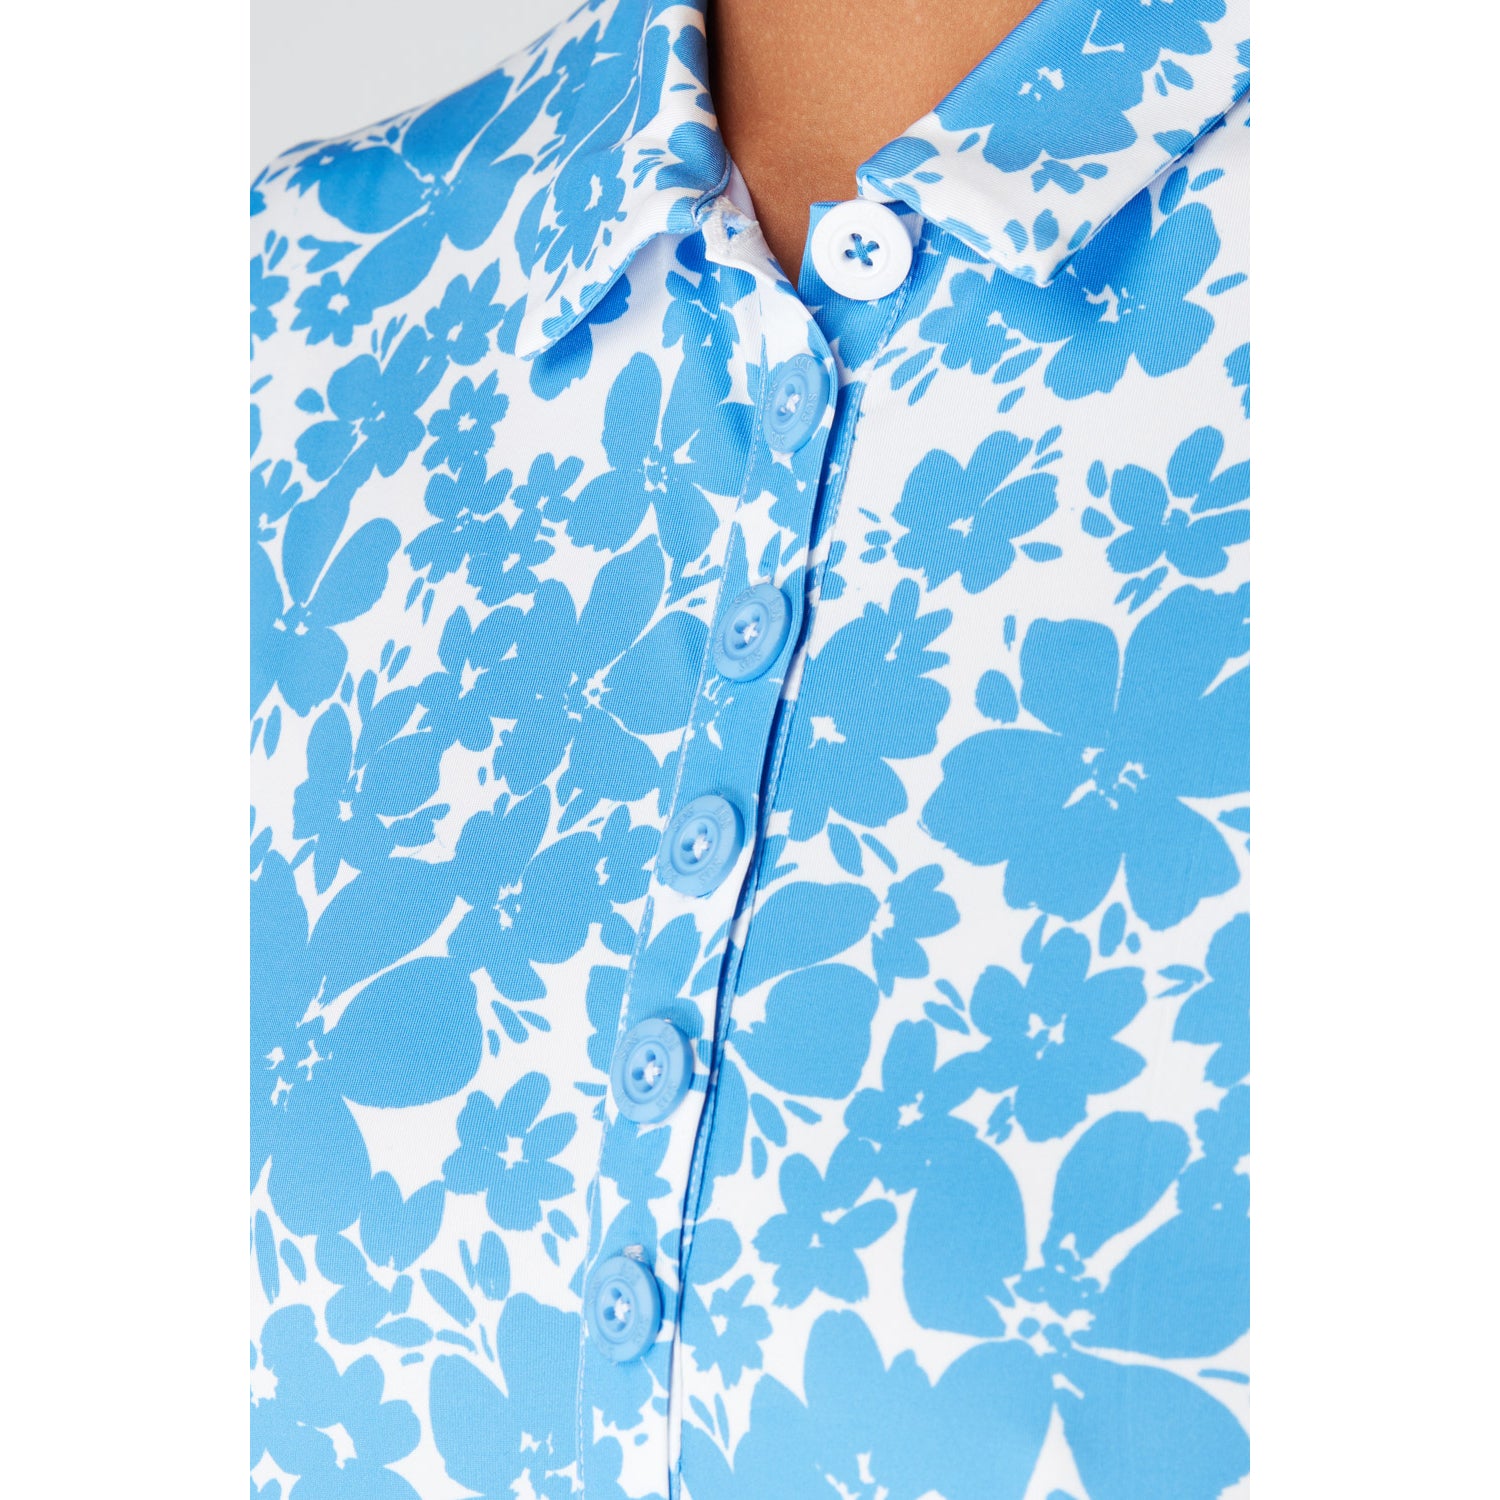 Swing Out Sister Full Bloom Print Cap Sleeve Golf Polo